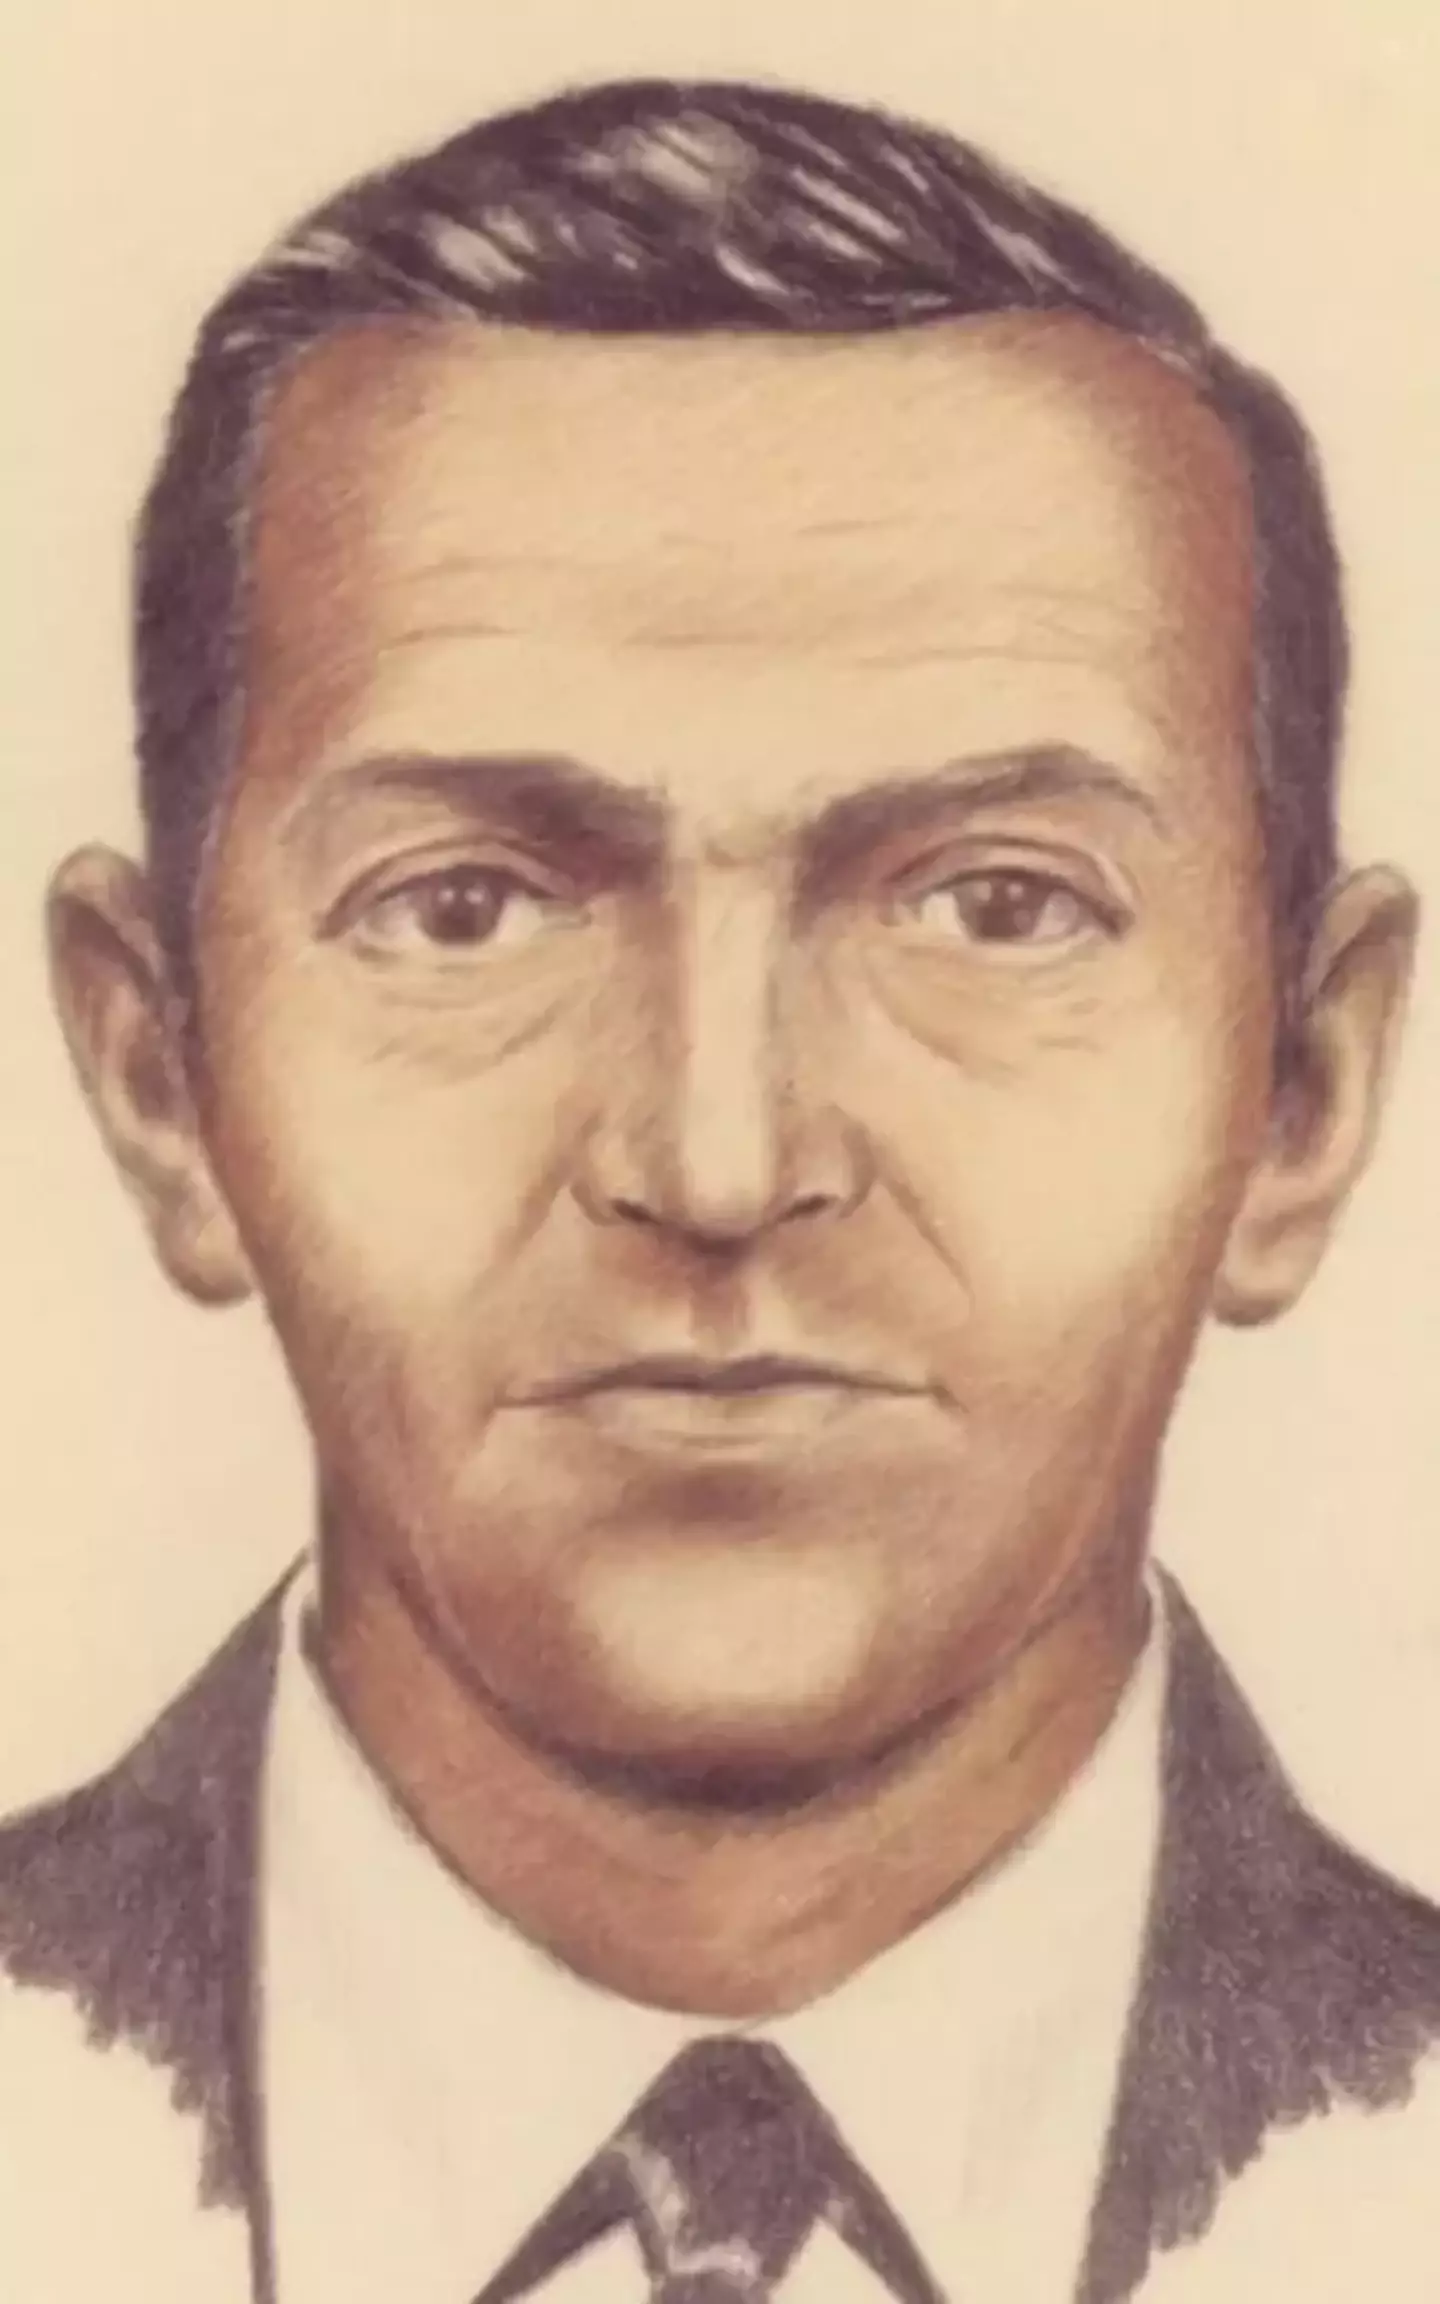 Ever since he disappeared in 1971 people have wondered exactly who DB Cooper was.